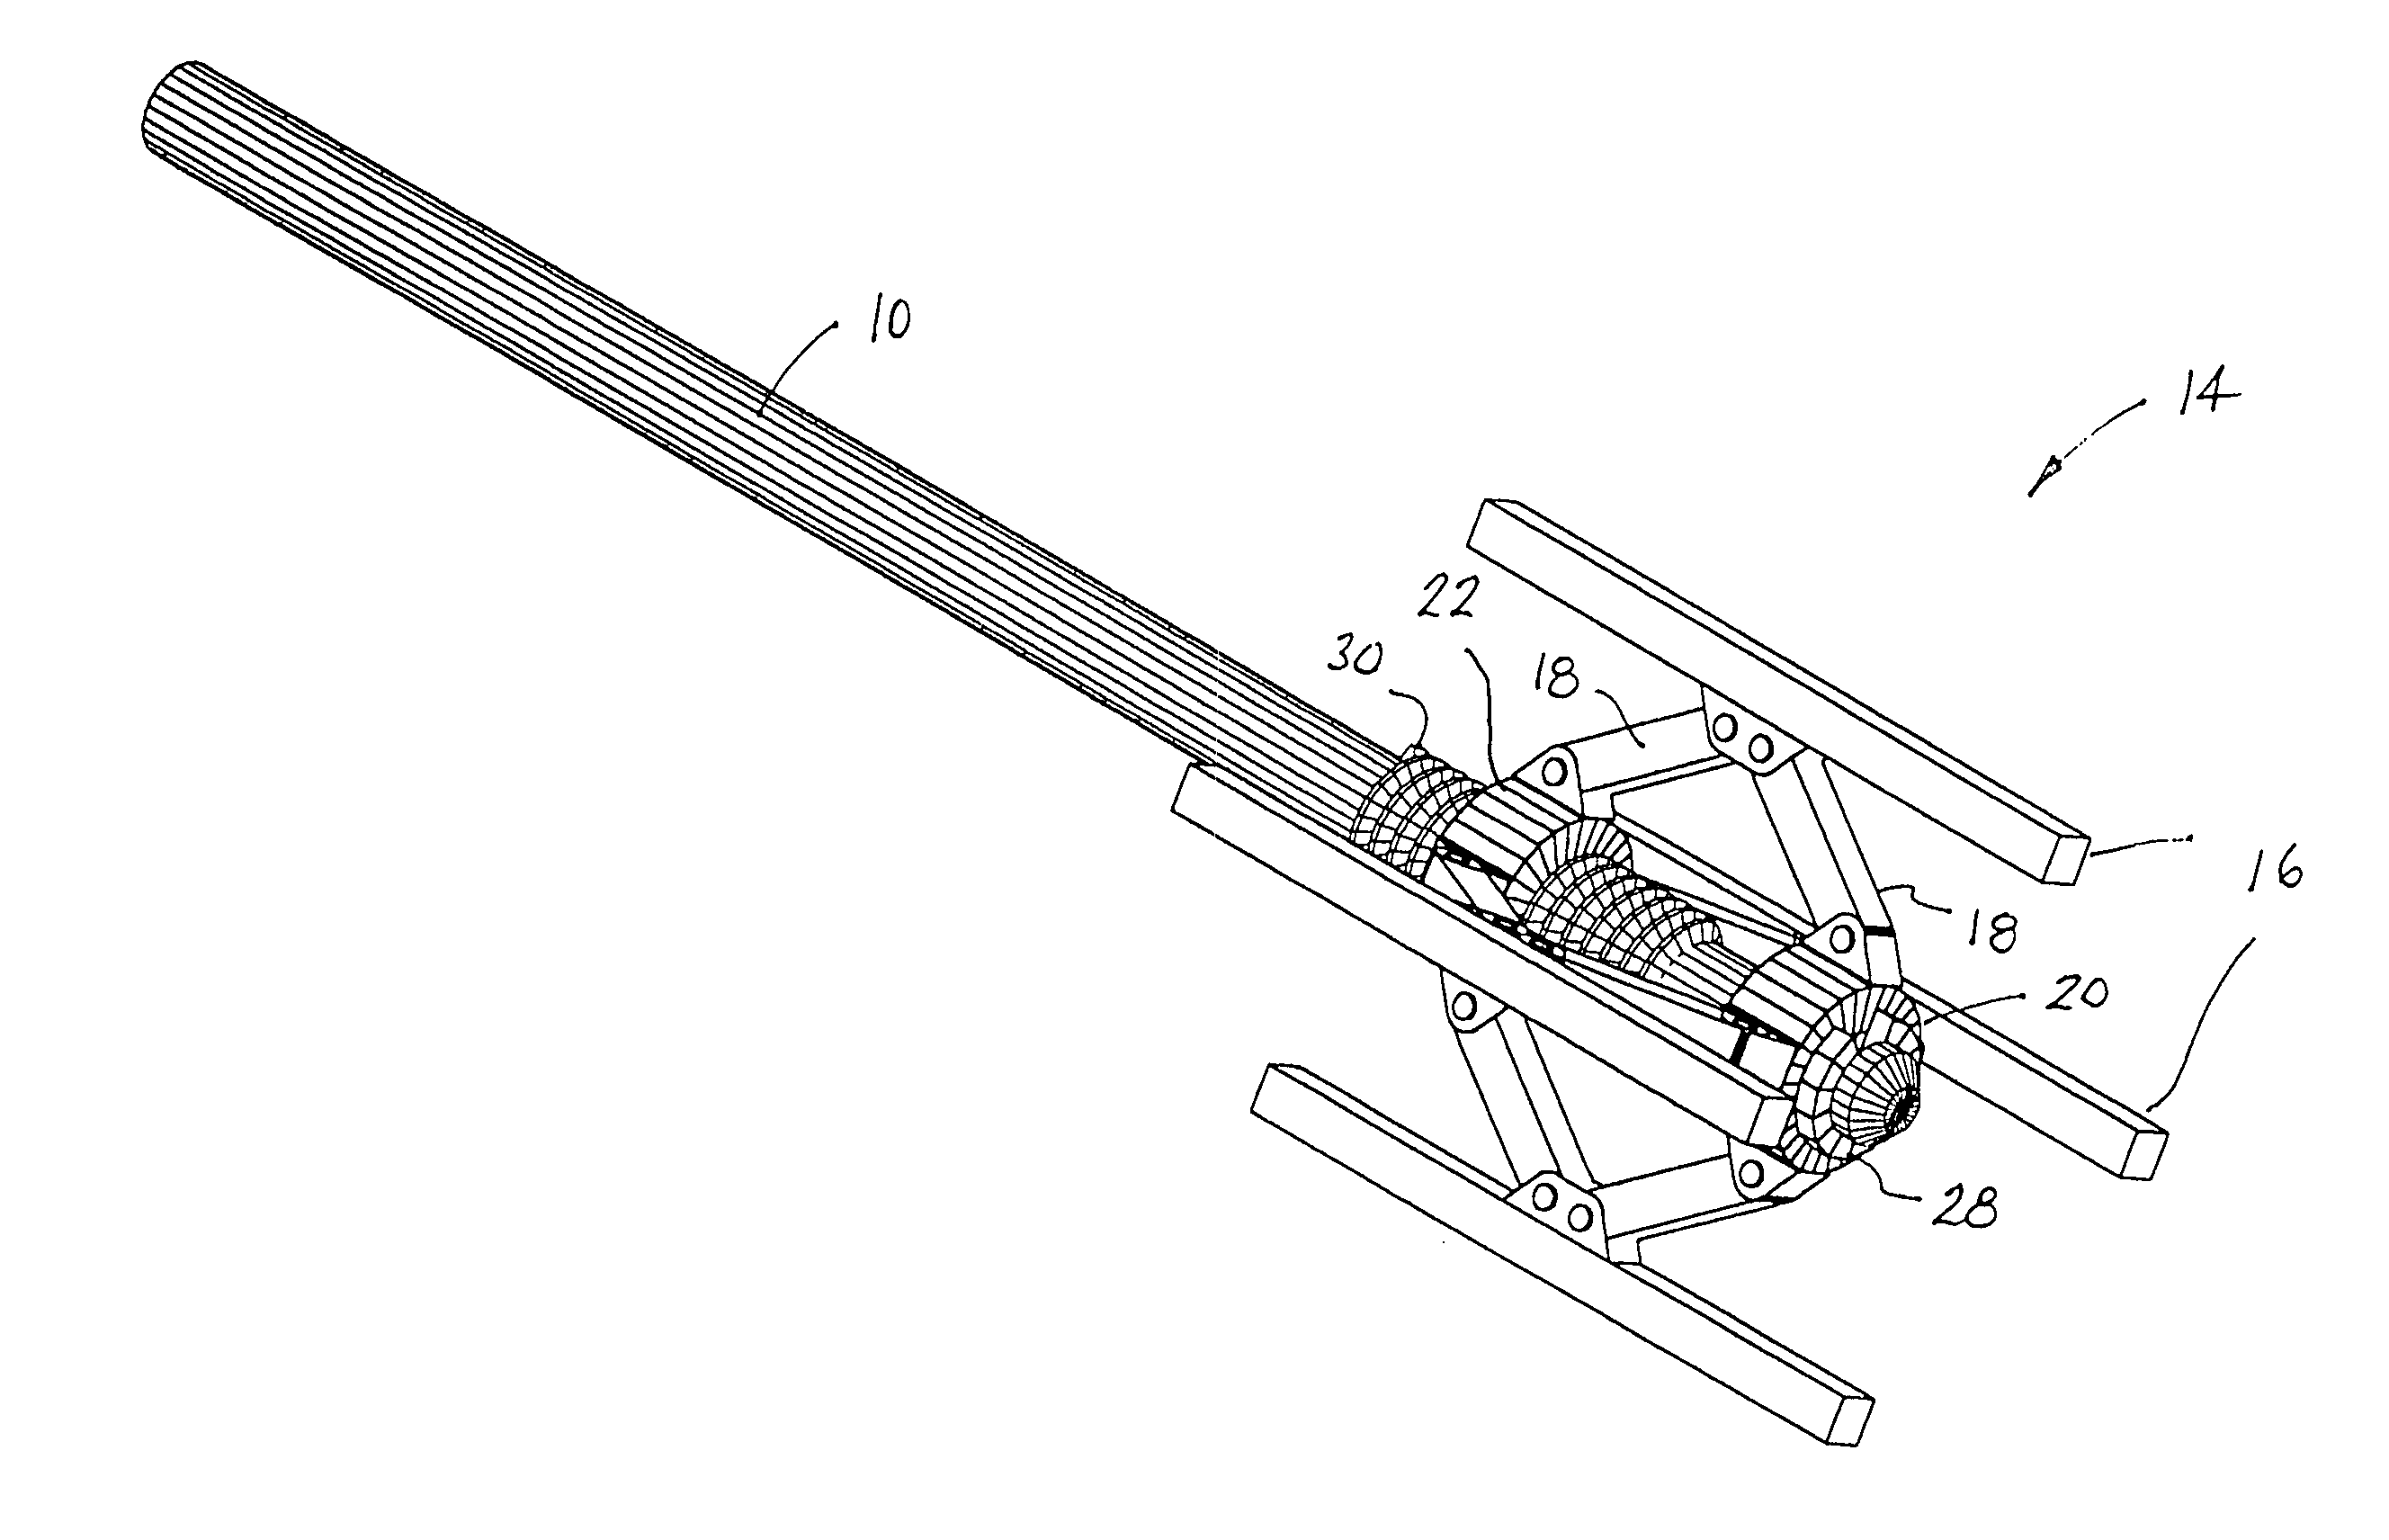 Mechanical bone tamping device for repair of osteoporotic bone fractures